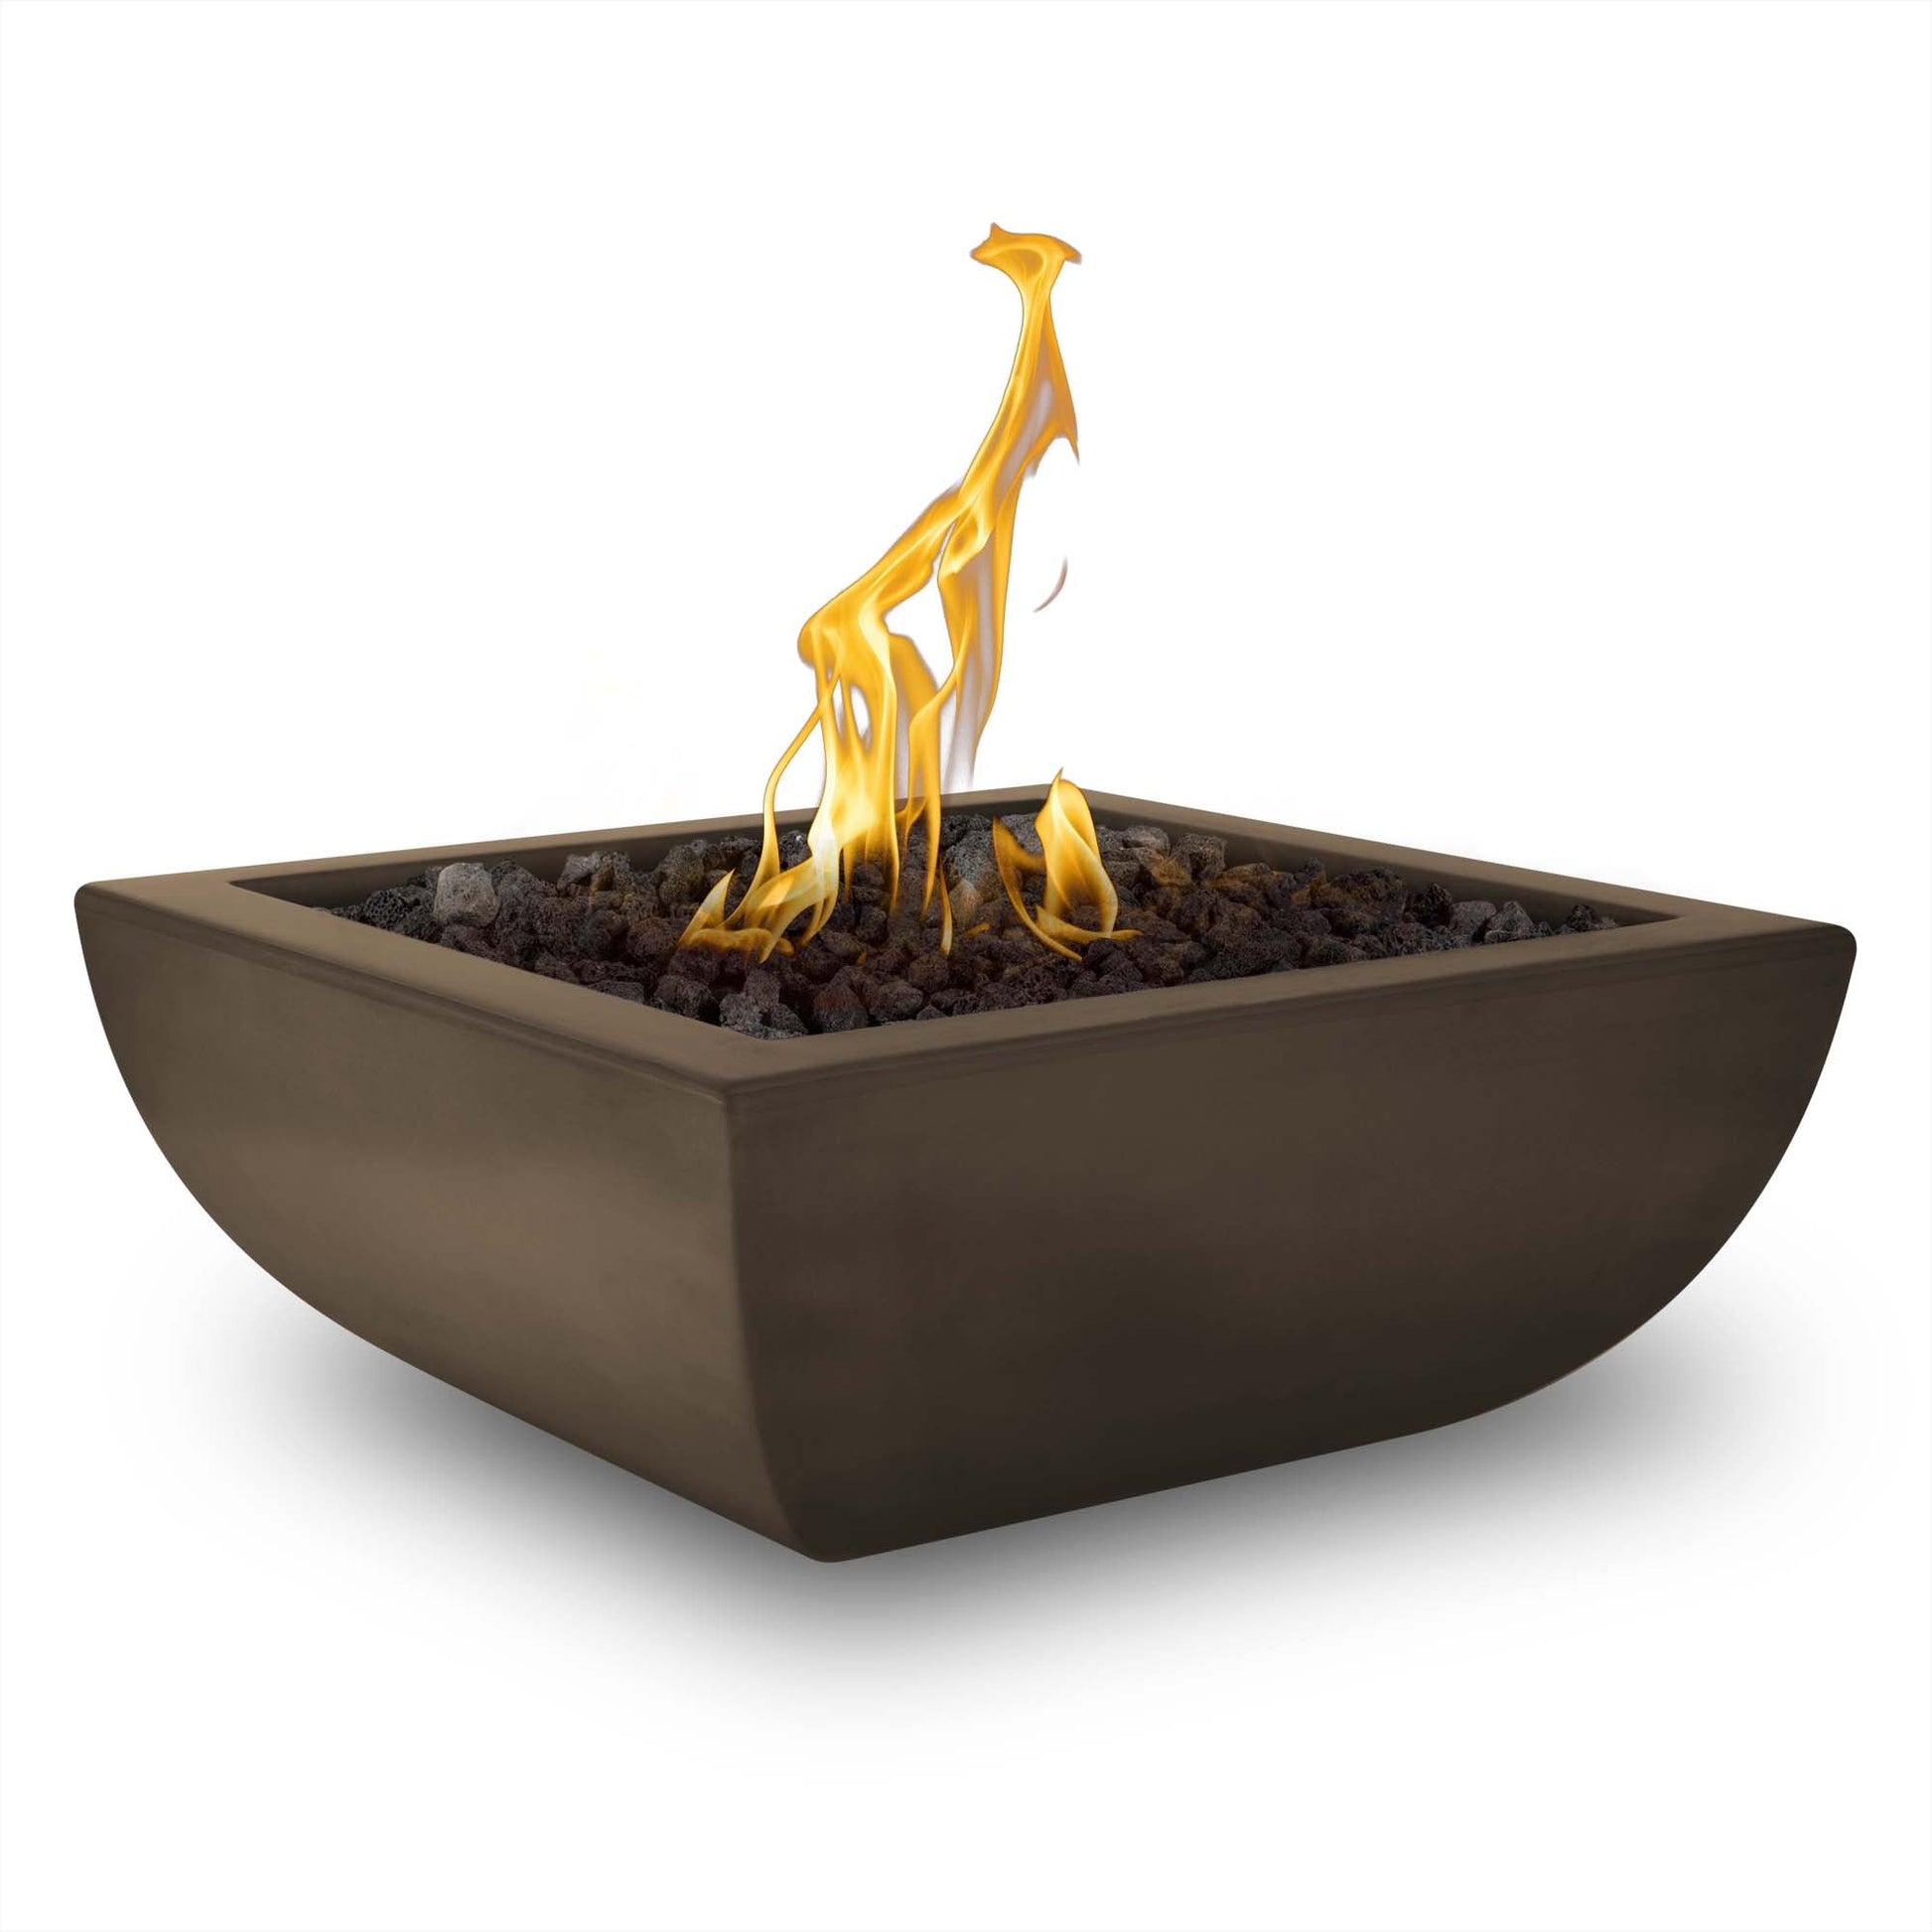 The Outdoor Plus Square Avalon 30" White GFRC Concrete Liquid Propane Fire Bowl with Match Lit with Flame Sense Ignition